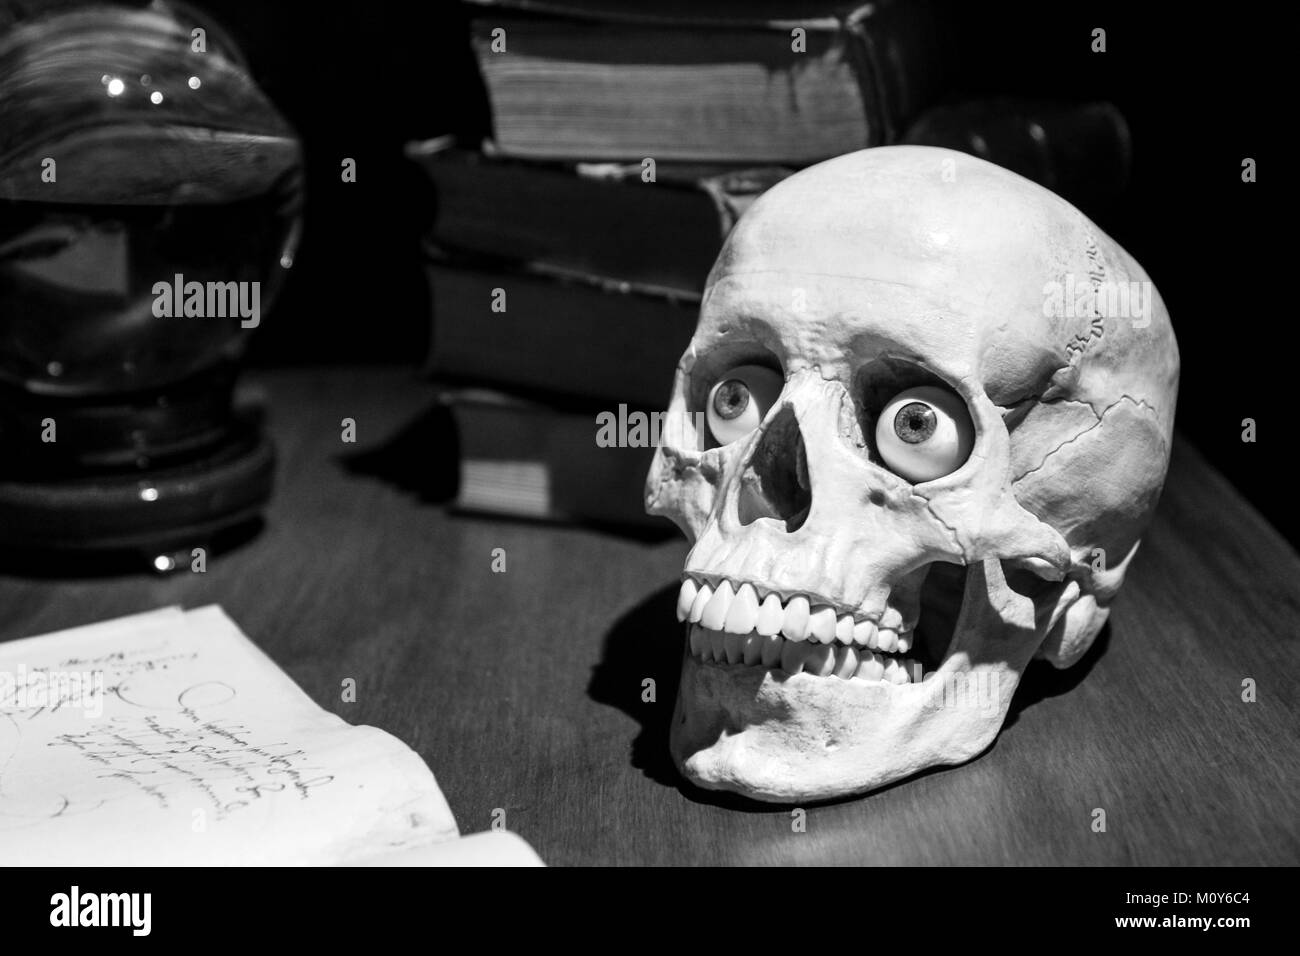 The model of the skull with realistic eyes standing on the old table among the old books and glass ball. Stock Photo